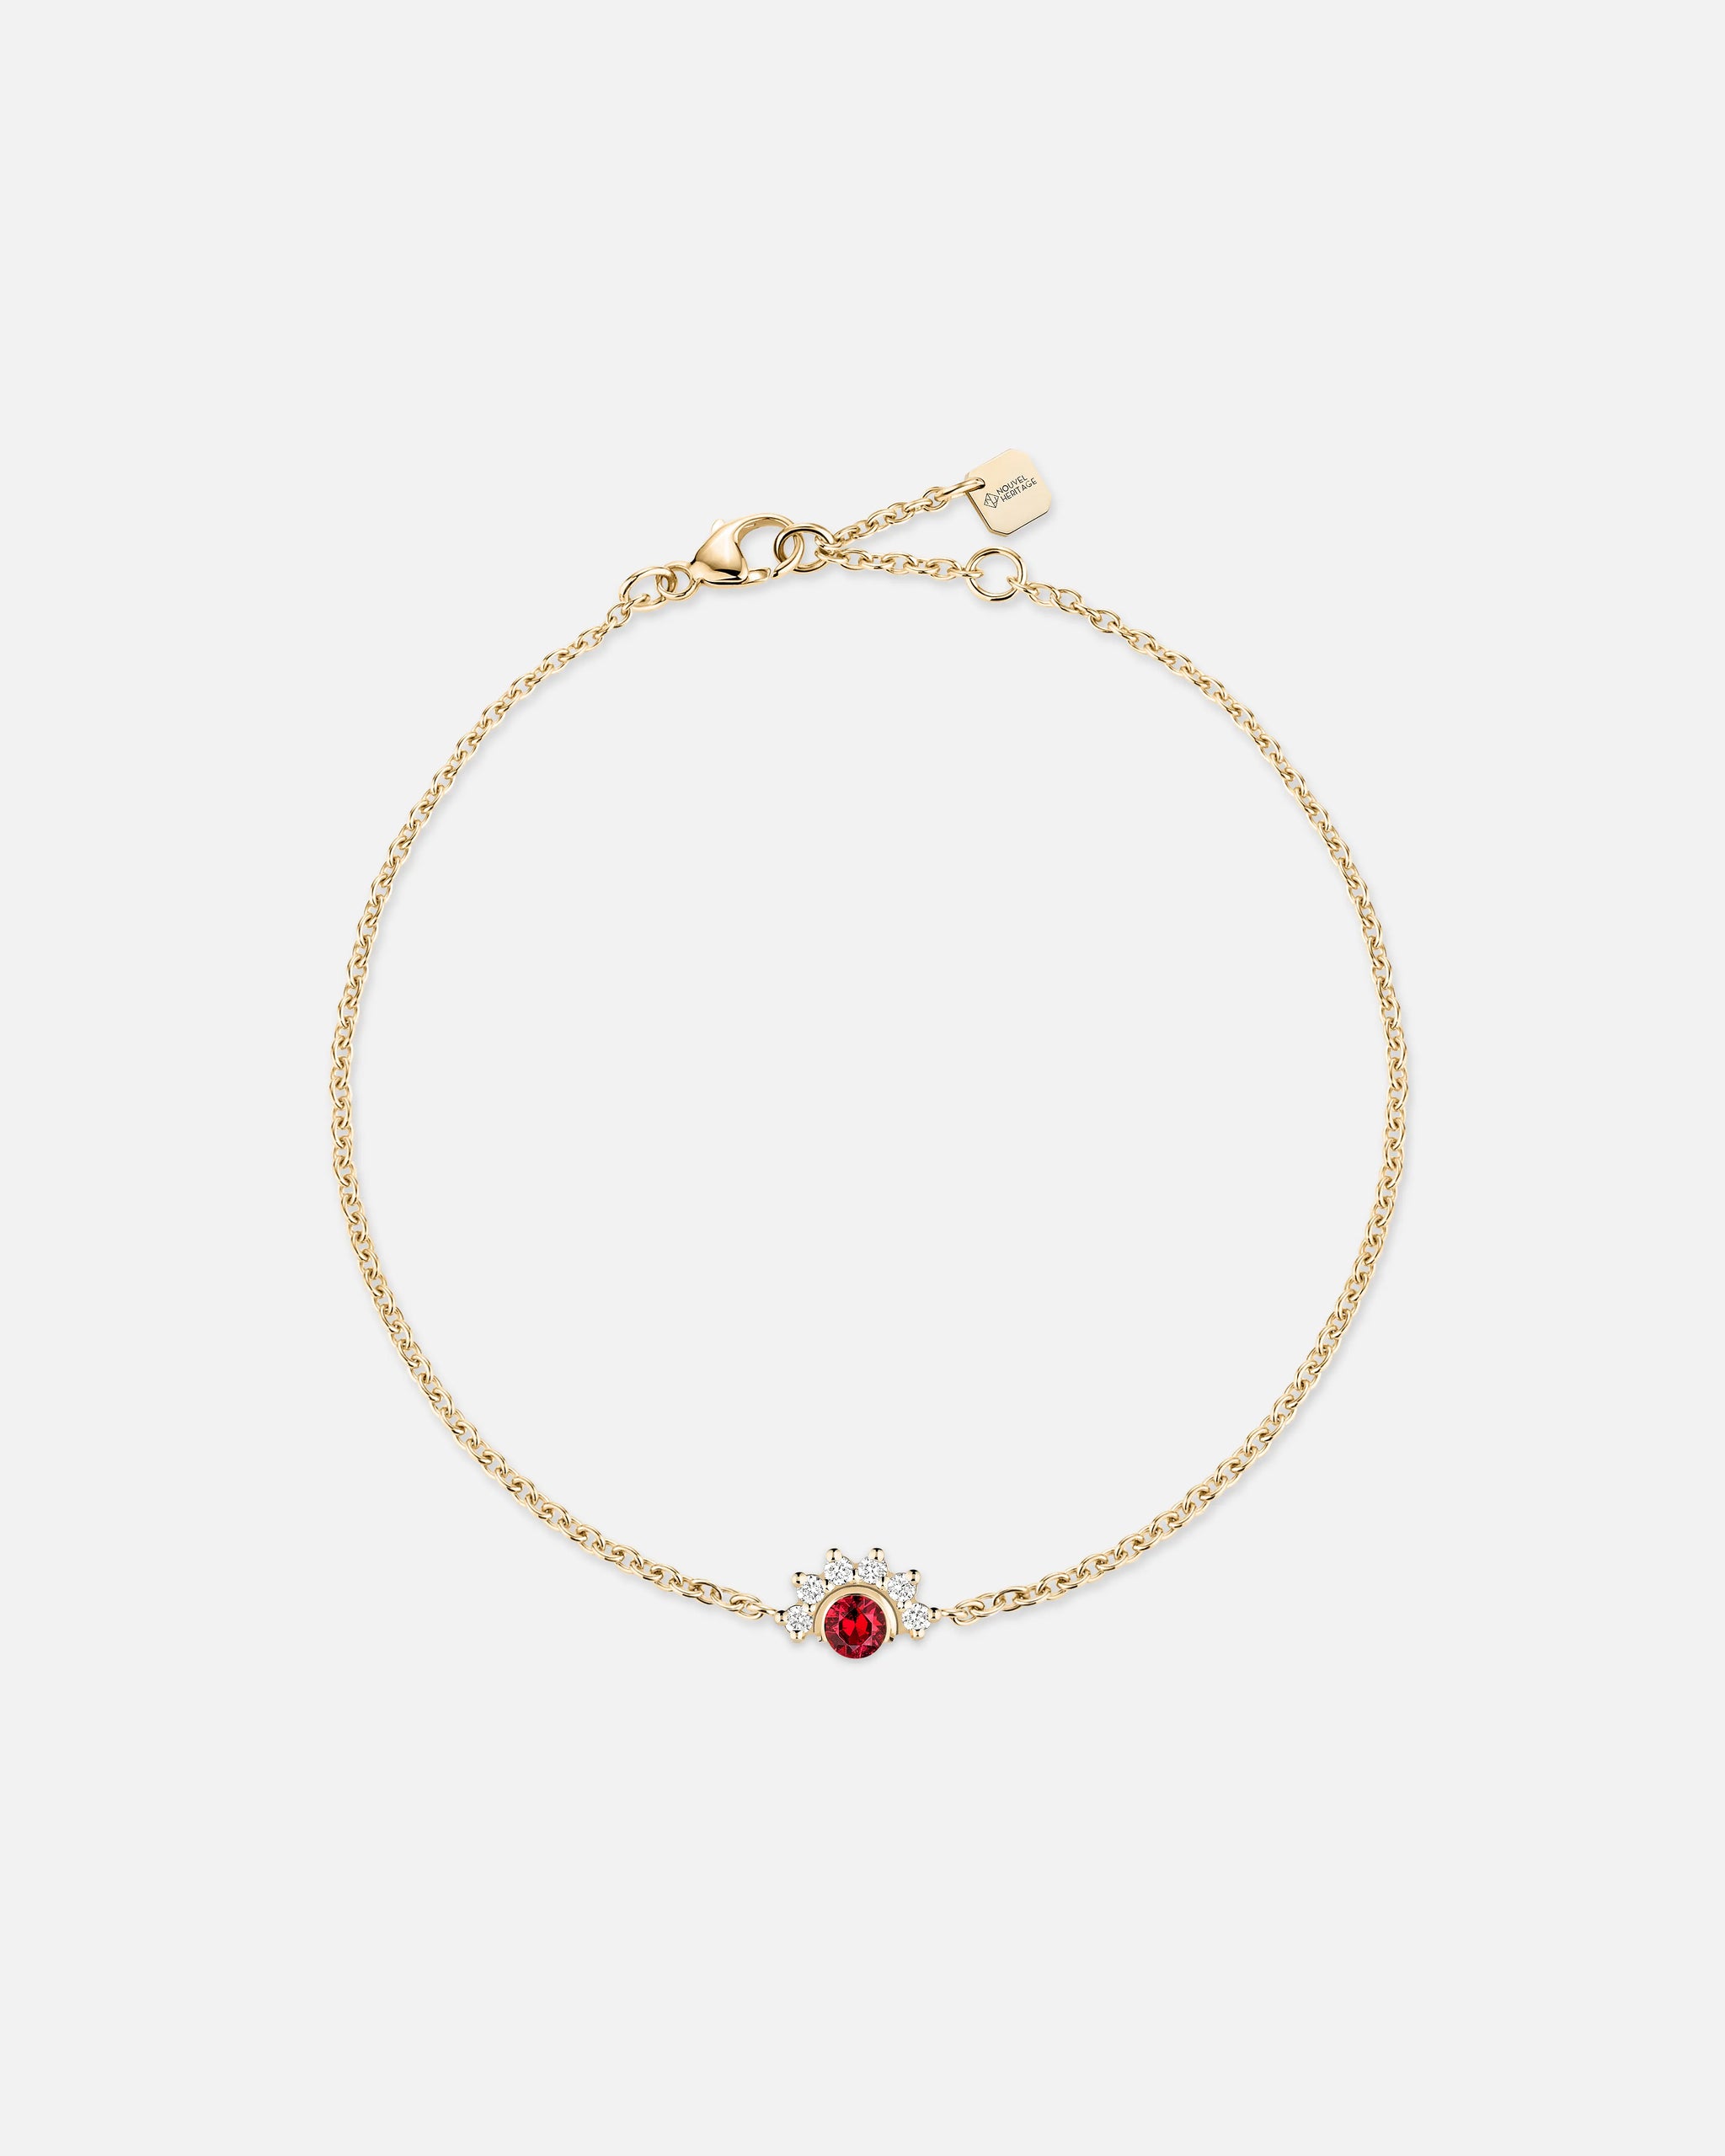 Red Spinel Bracelet in Yellow Gold - 1 - Nouvel Heritage